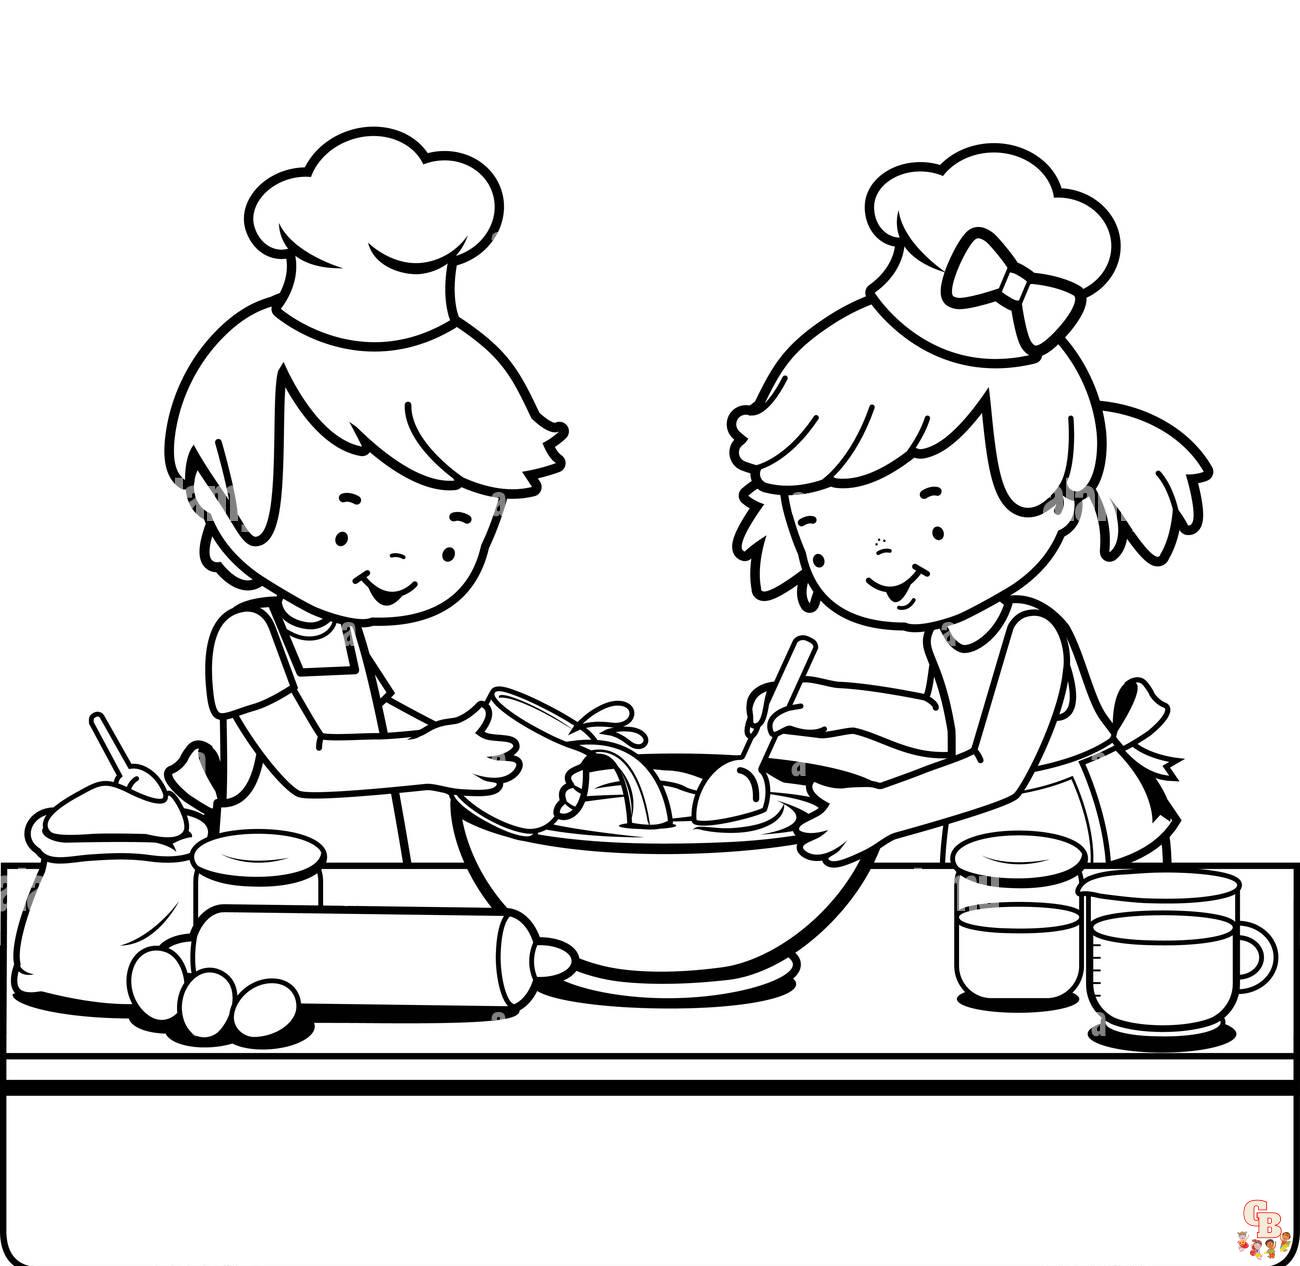 https://gbcoloring.com/wp-content/uploads/2023/03/cooking-coloring-pages-7.jpg